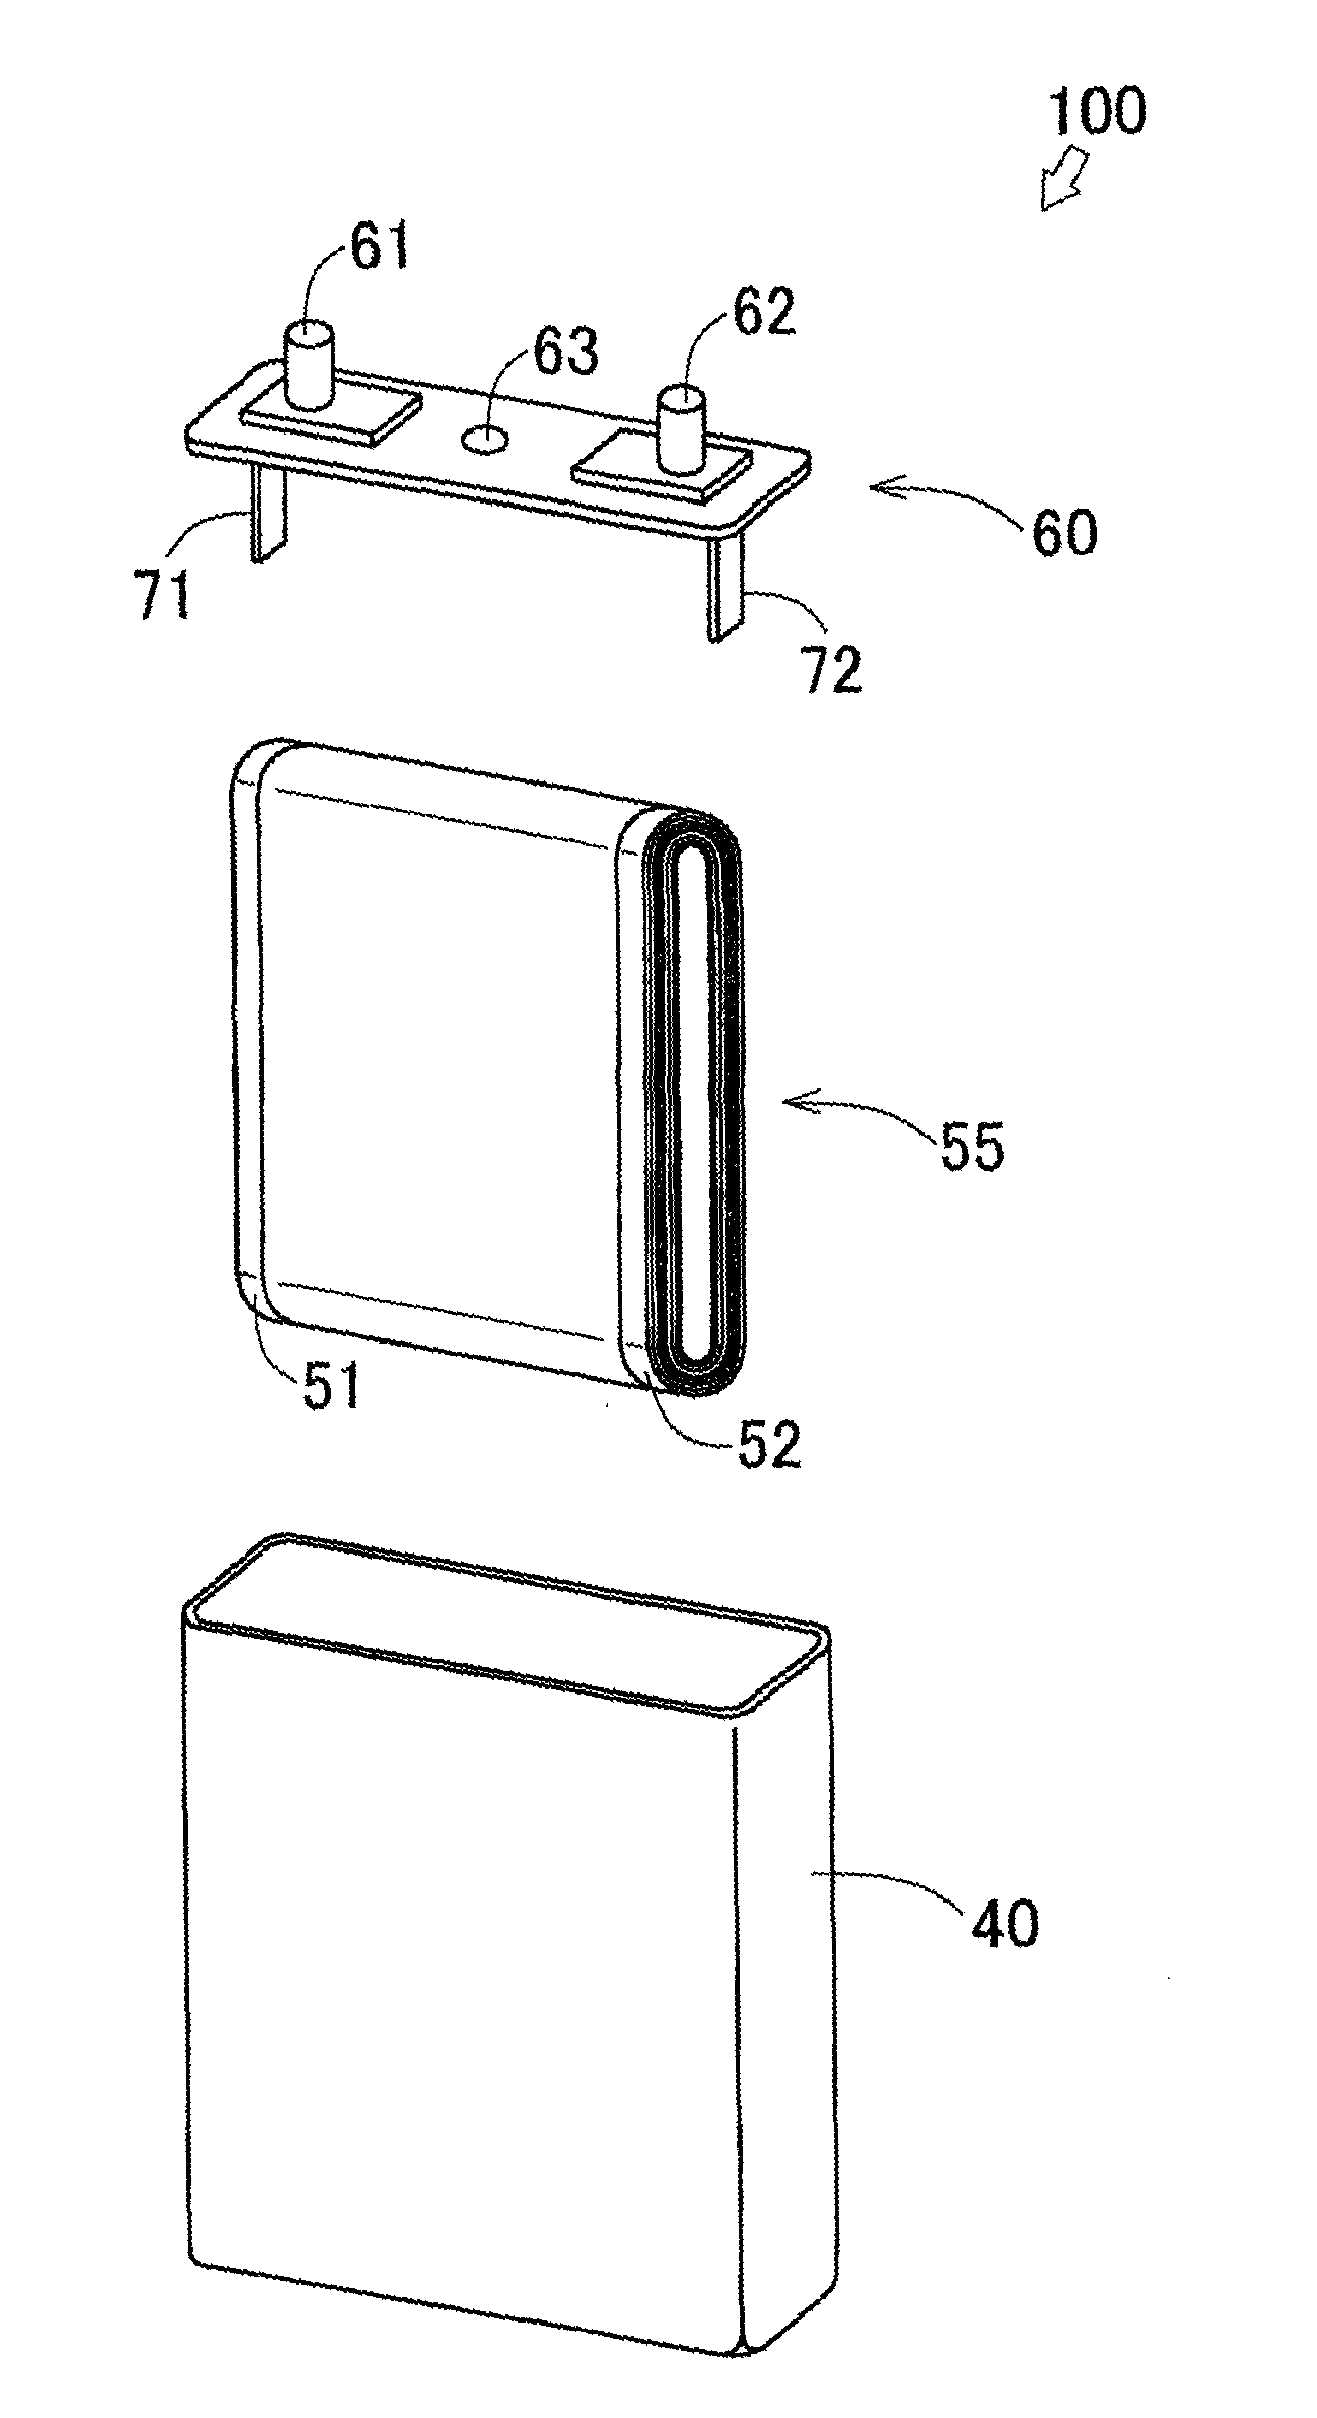 Nonaqueous electrolyte secondary battery and method of manufacturing nonaqueous electrolyte secondary battery